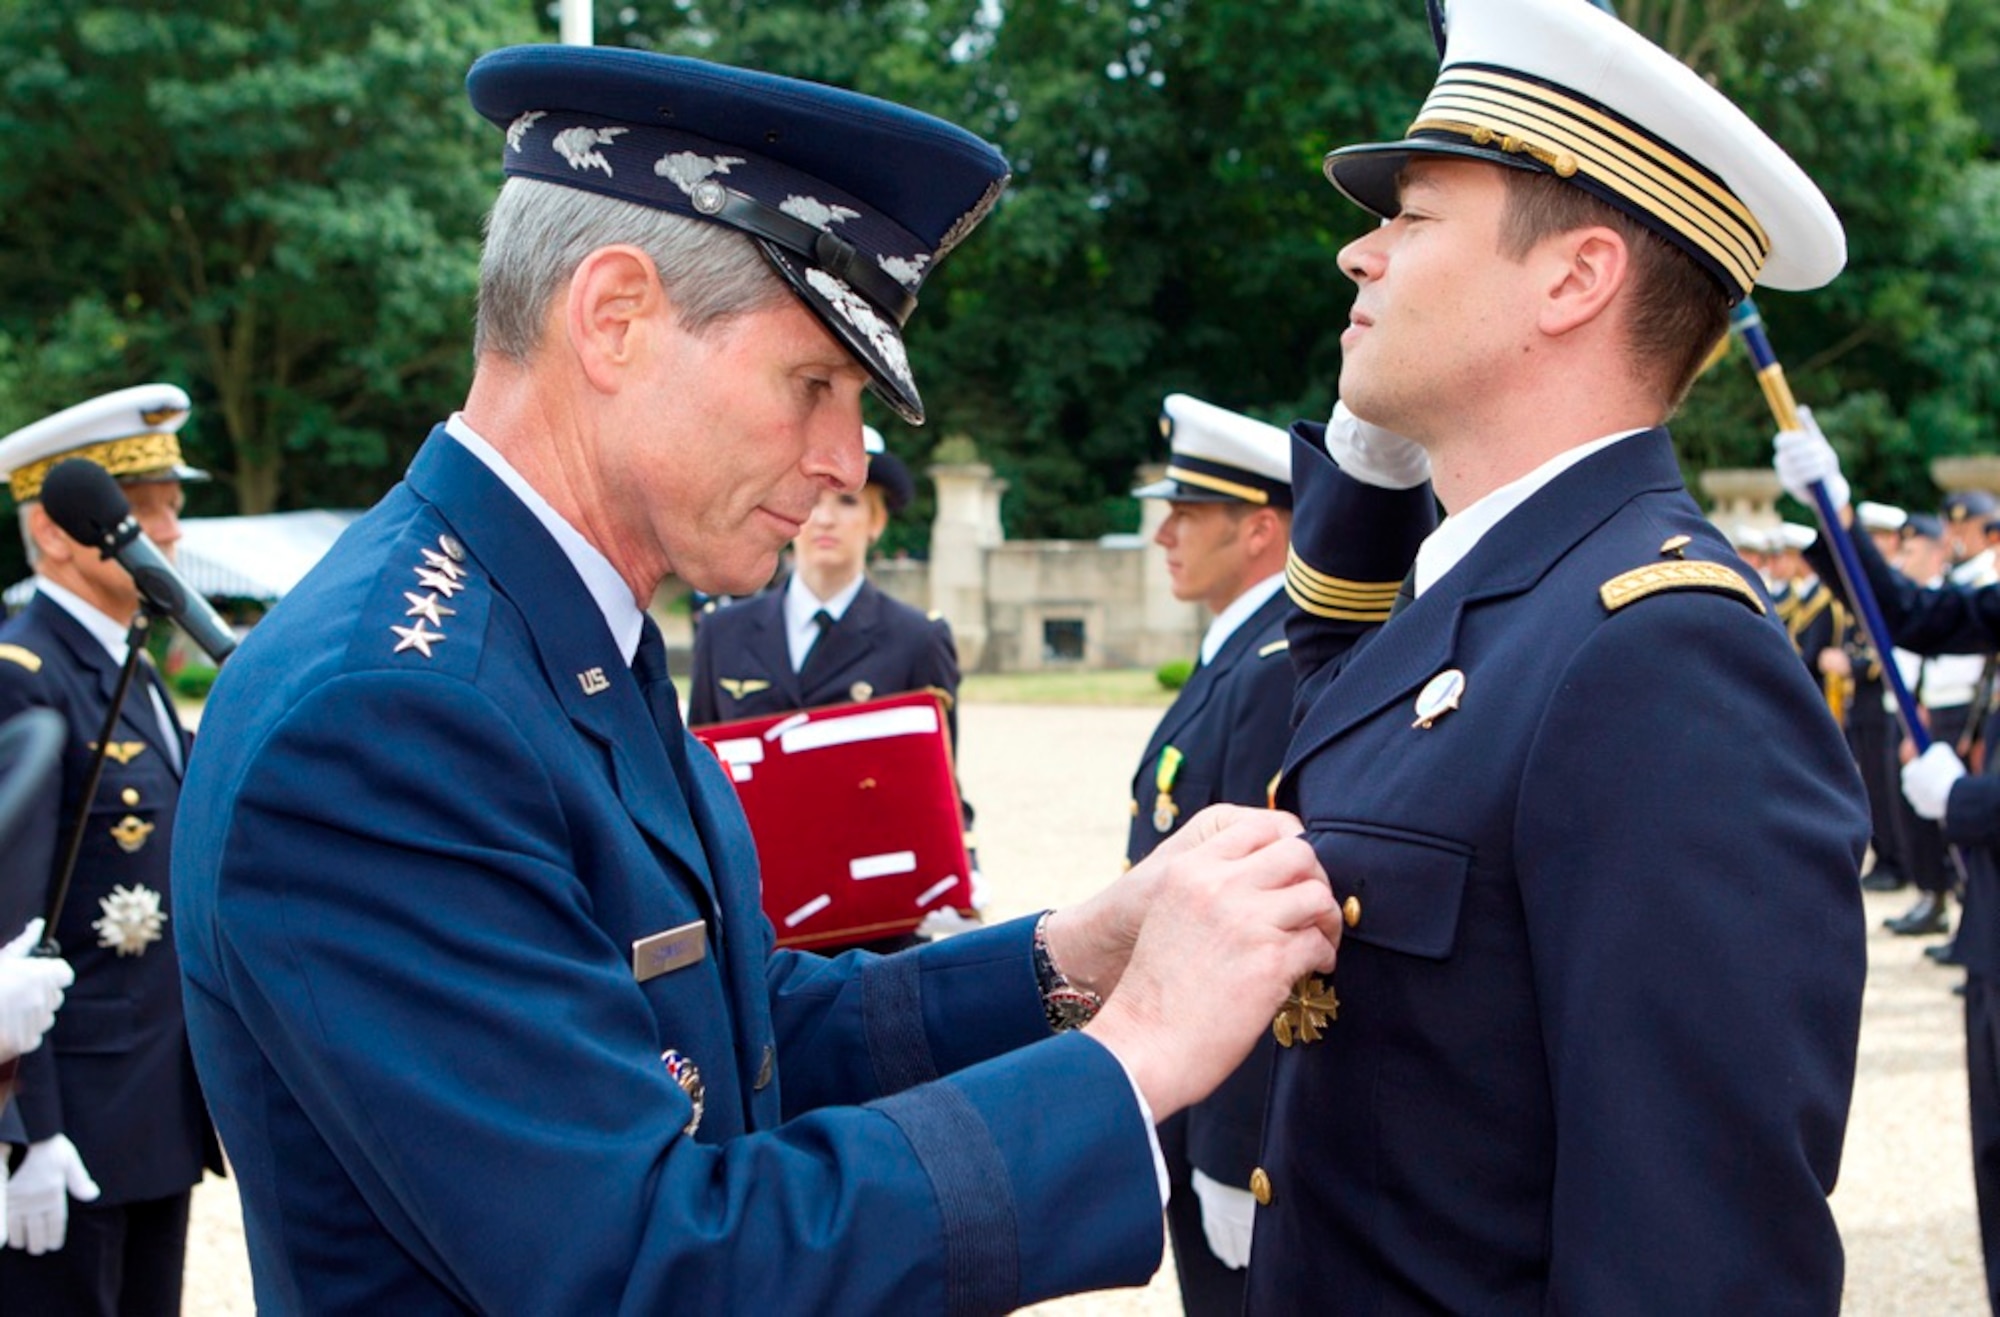 Air Force Chief of Staff Gen. Norton Schwartz pins the Distinguished Flying Cross with Valor on the uniform of French air force Maj. Guillaume Vernet July 13, 2011, at the Lafayette Escadrille Memorial in Marnes-la-Coquette, France.  Vernet was awarded the decoration for repeatedly flying into hostile territory in December 2009 while deployed to Afghanistan as an exchange officer with the 41st Rescue Squadron from Moody Air Force Base, Ga.  During that mission, Vernet rescued an urgent casualty whose injury put the lives of 160 British soldiers in jeopardy.  (Courtesy photo)